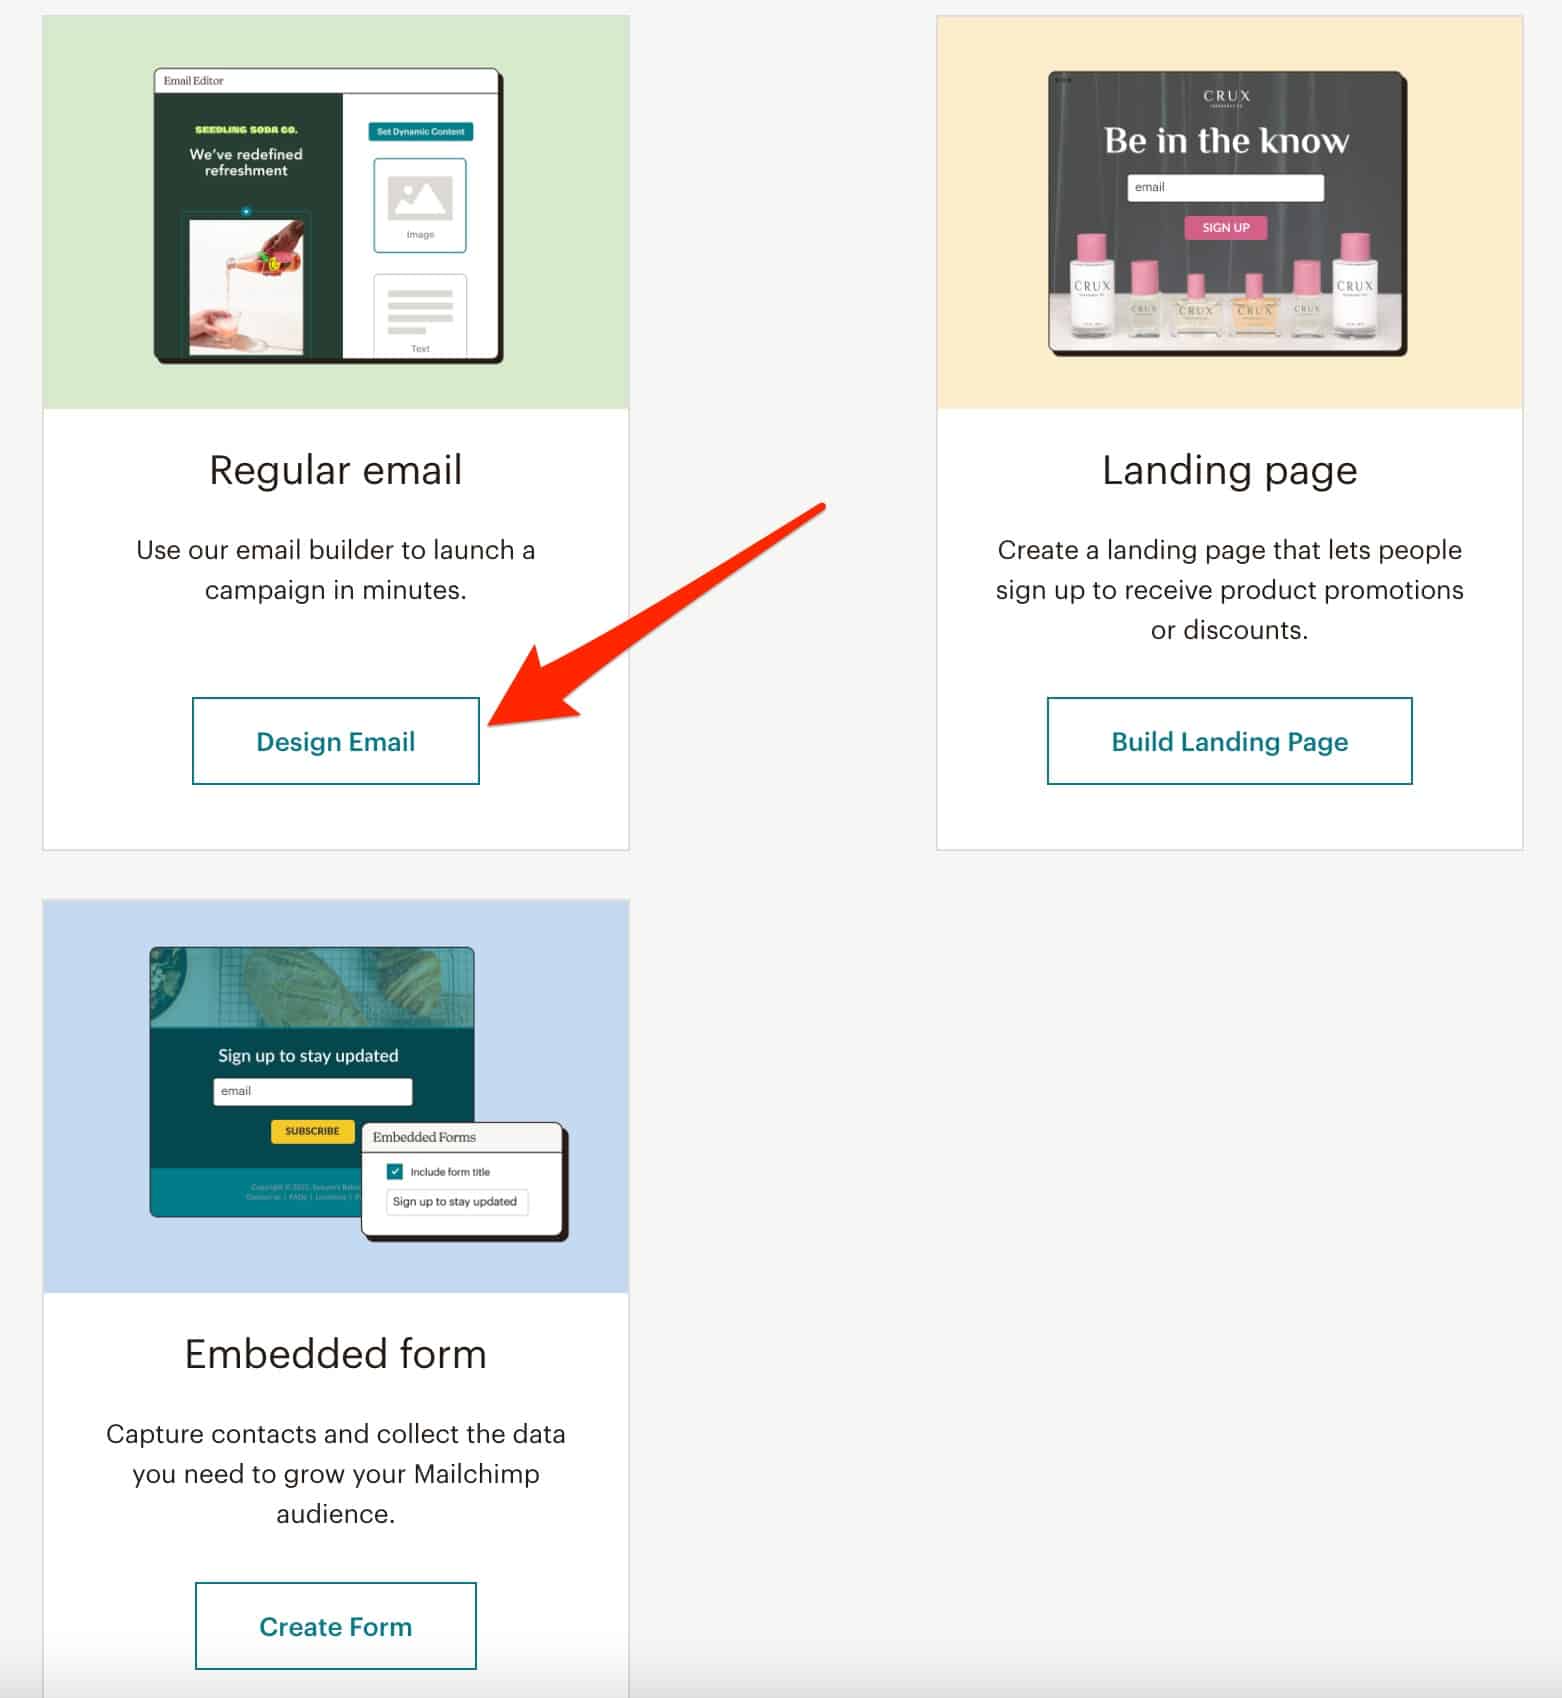 Templates offered by Mailchimp.